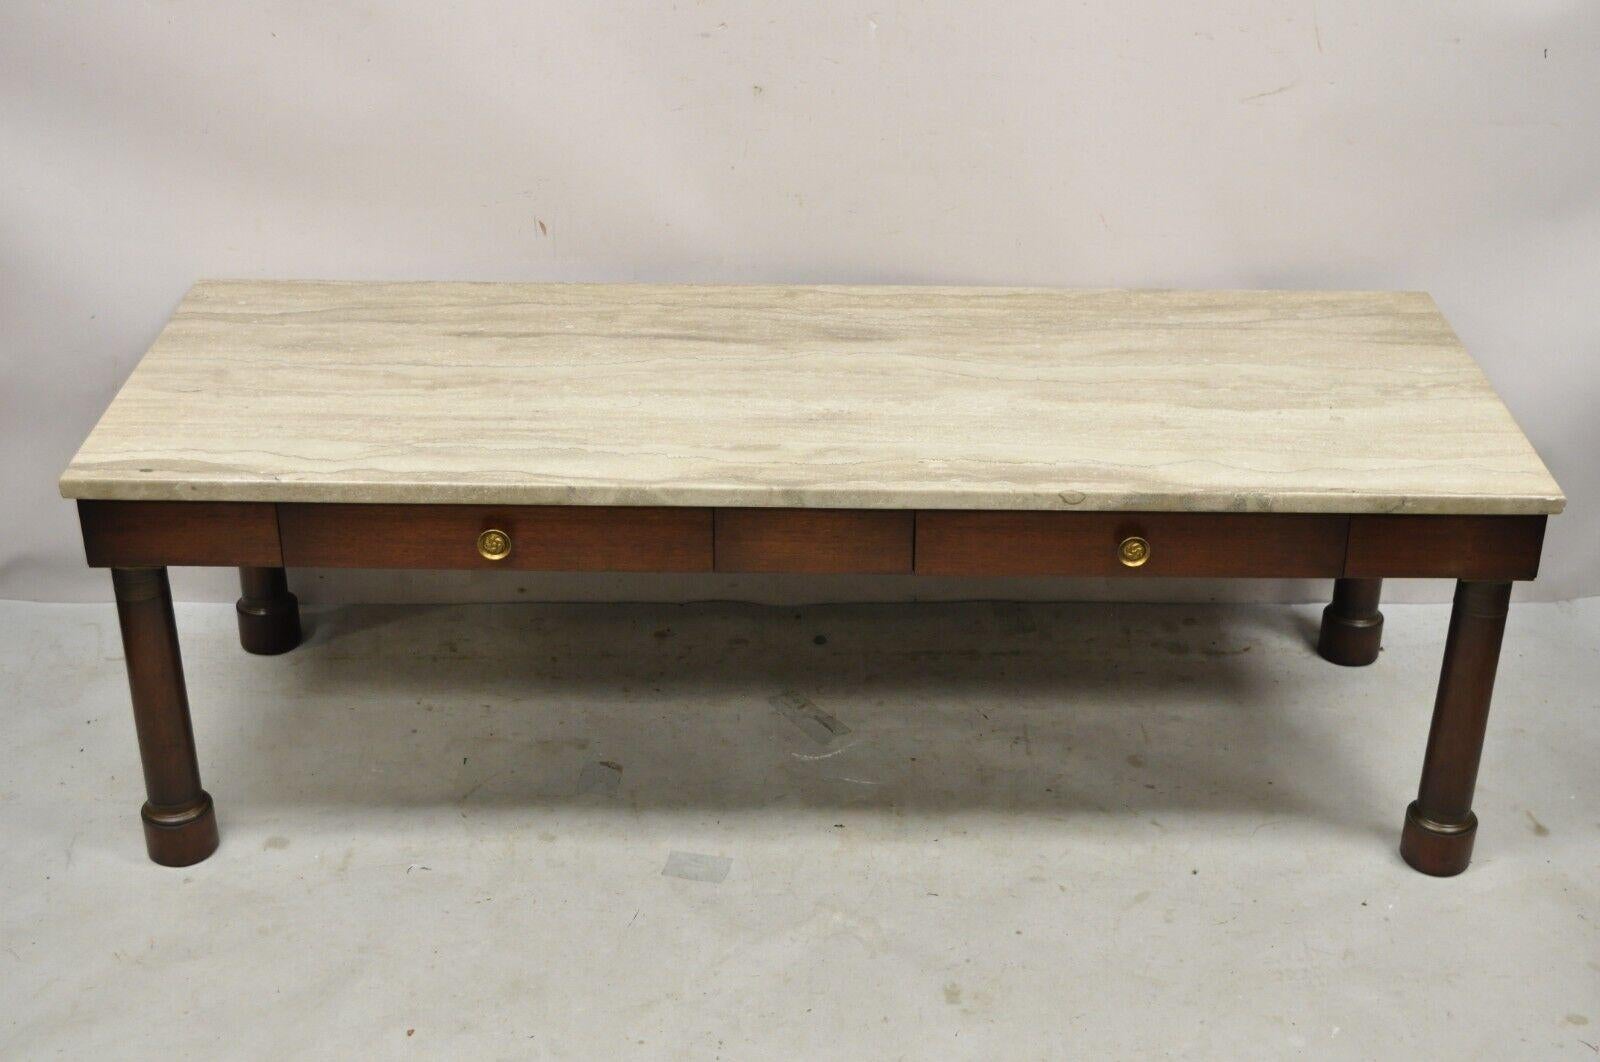 Vintage Empire Style Custom Mahogany Marble Top Coffee Table with 2 Drawers. Item features round column form legs, rectangular travertine/marble top, quality craftsmanship, great style and form. Circa Mid 20th Century. Measurements: 19